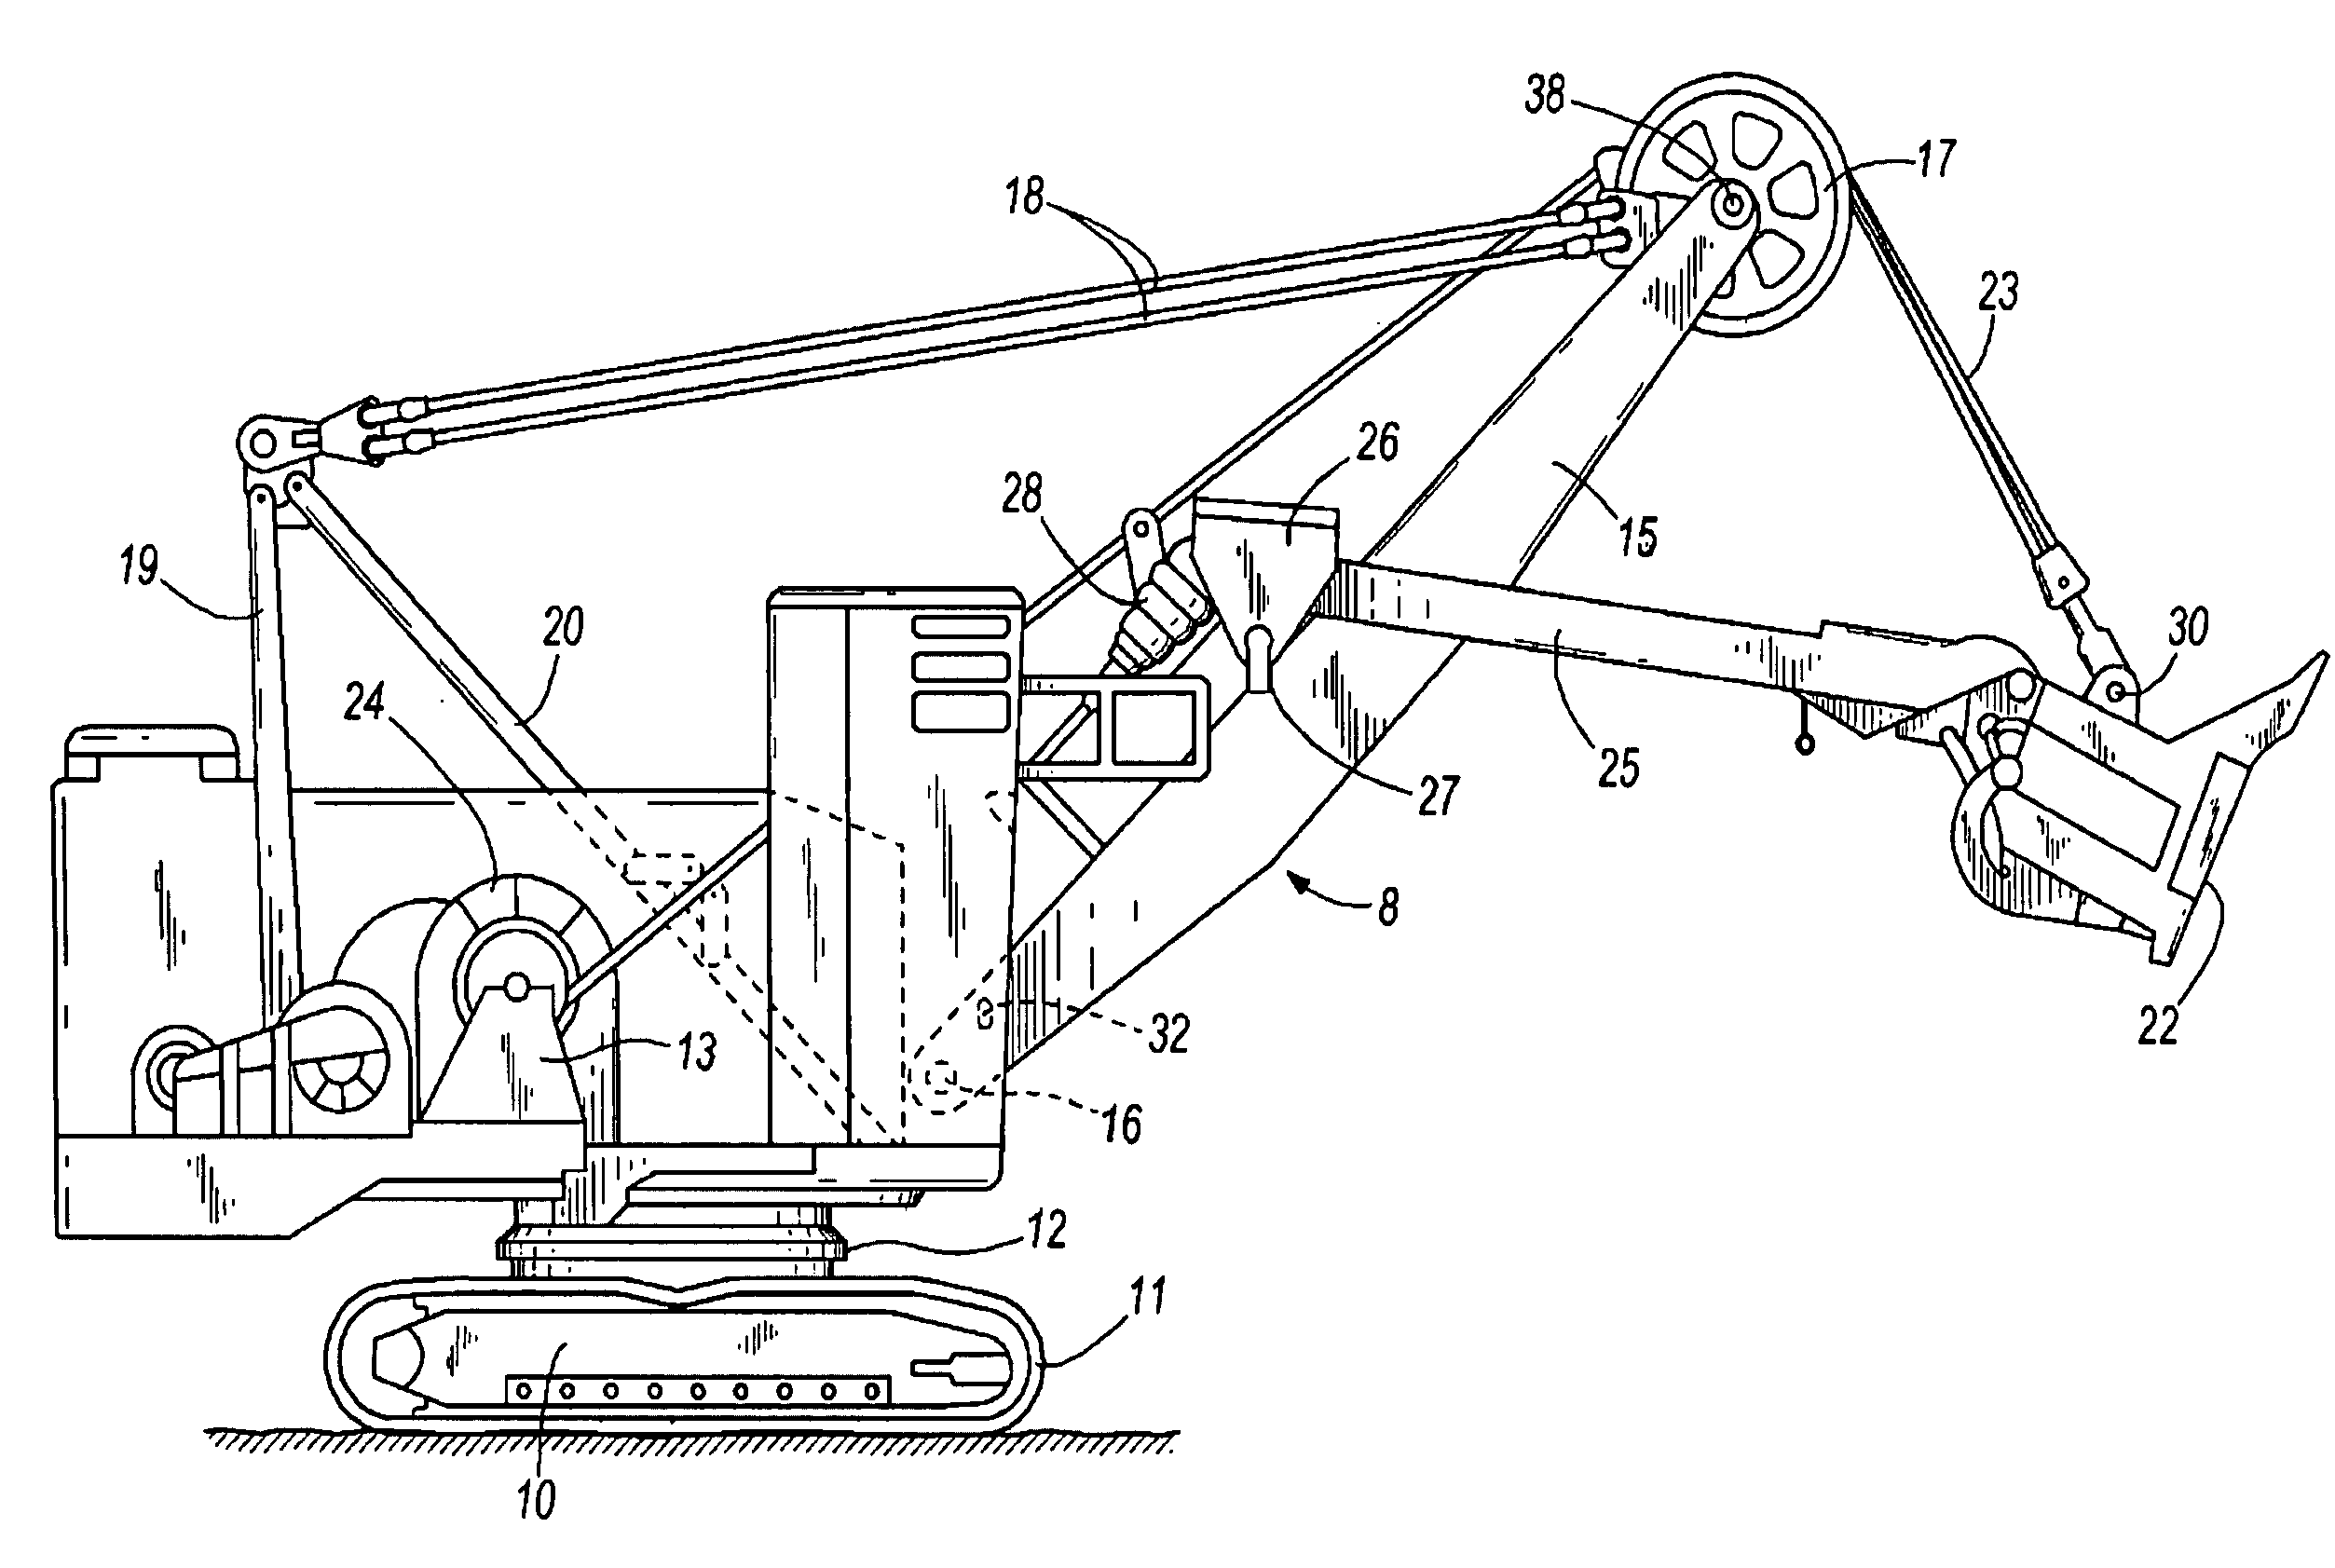 Device for measuring a load at the end of a rope wrapped over a rod